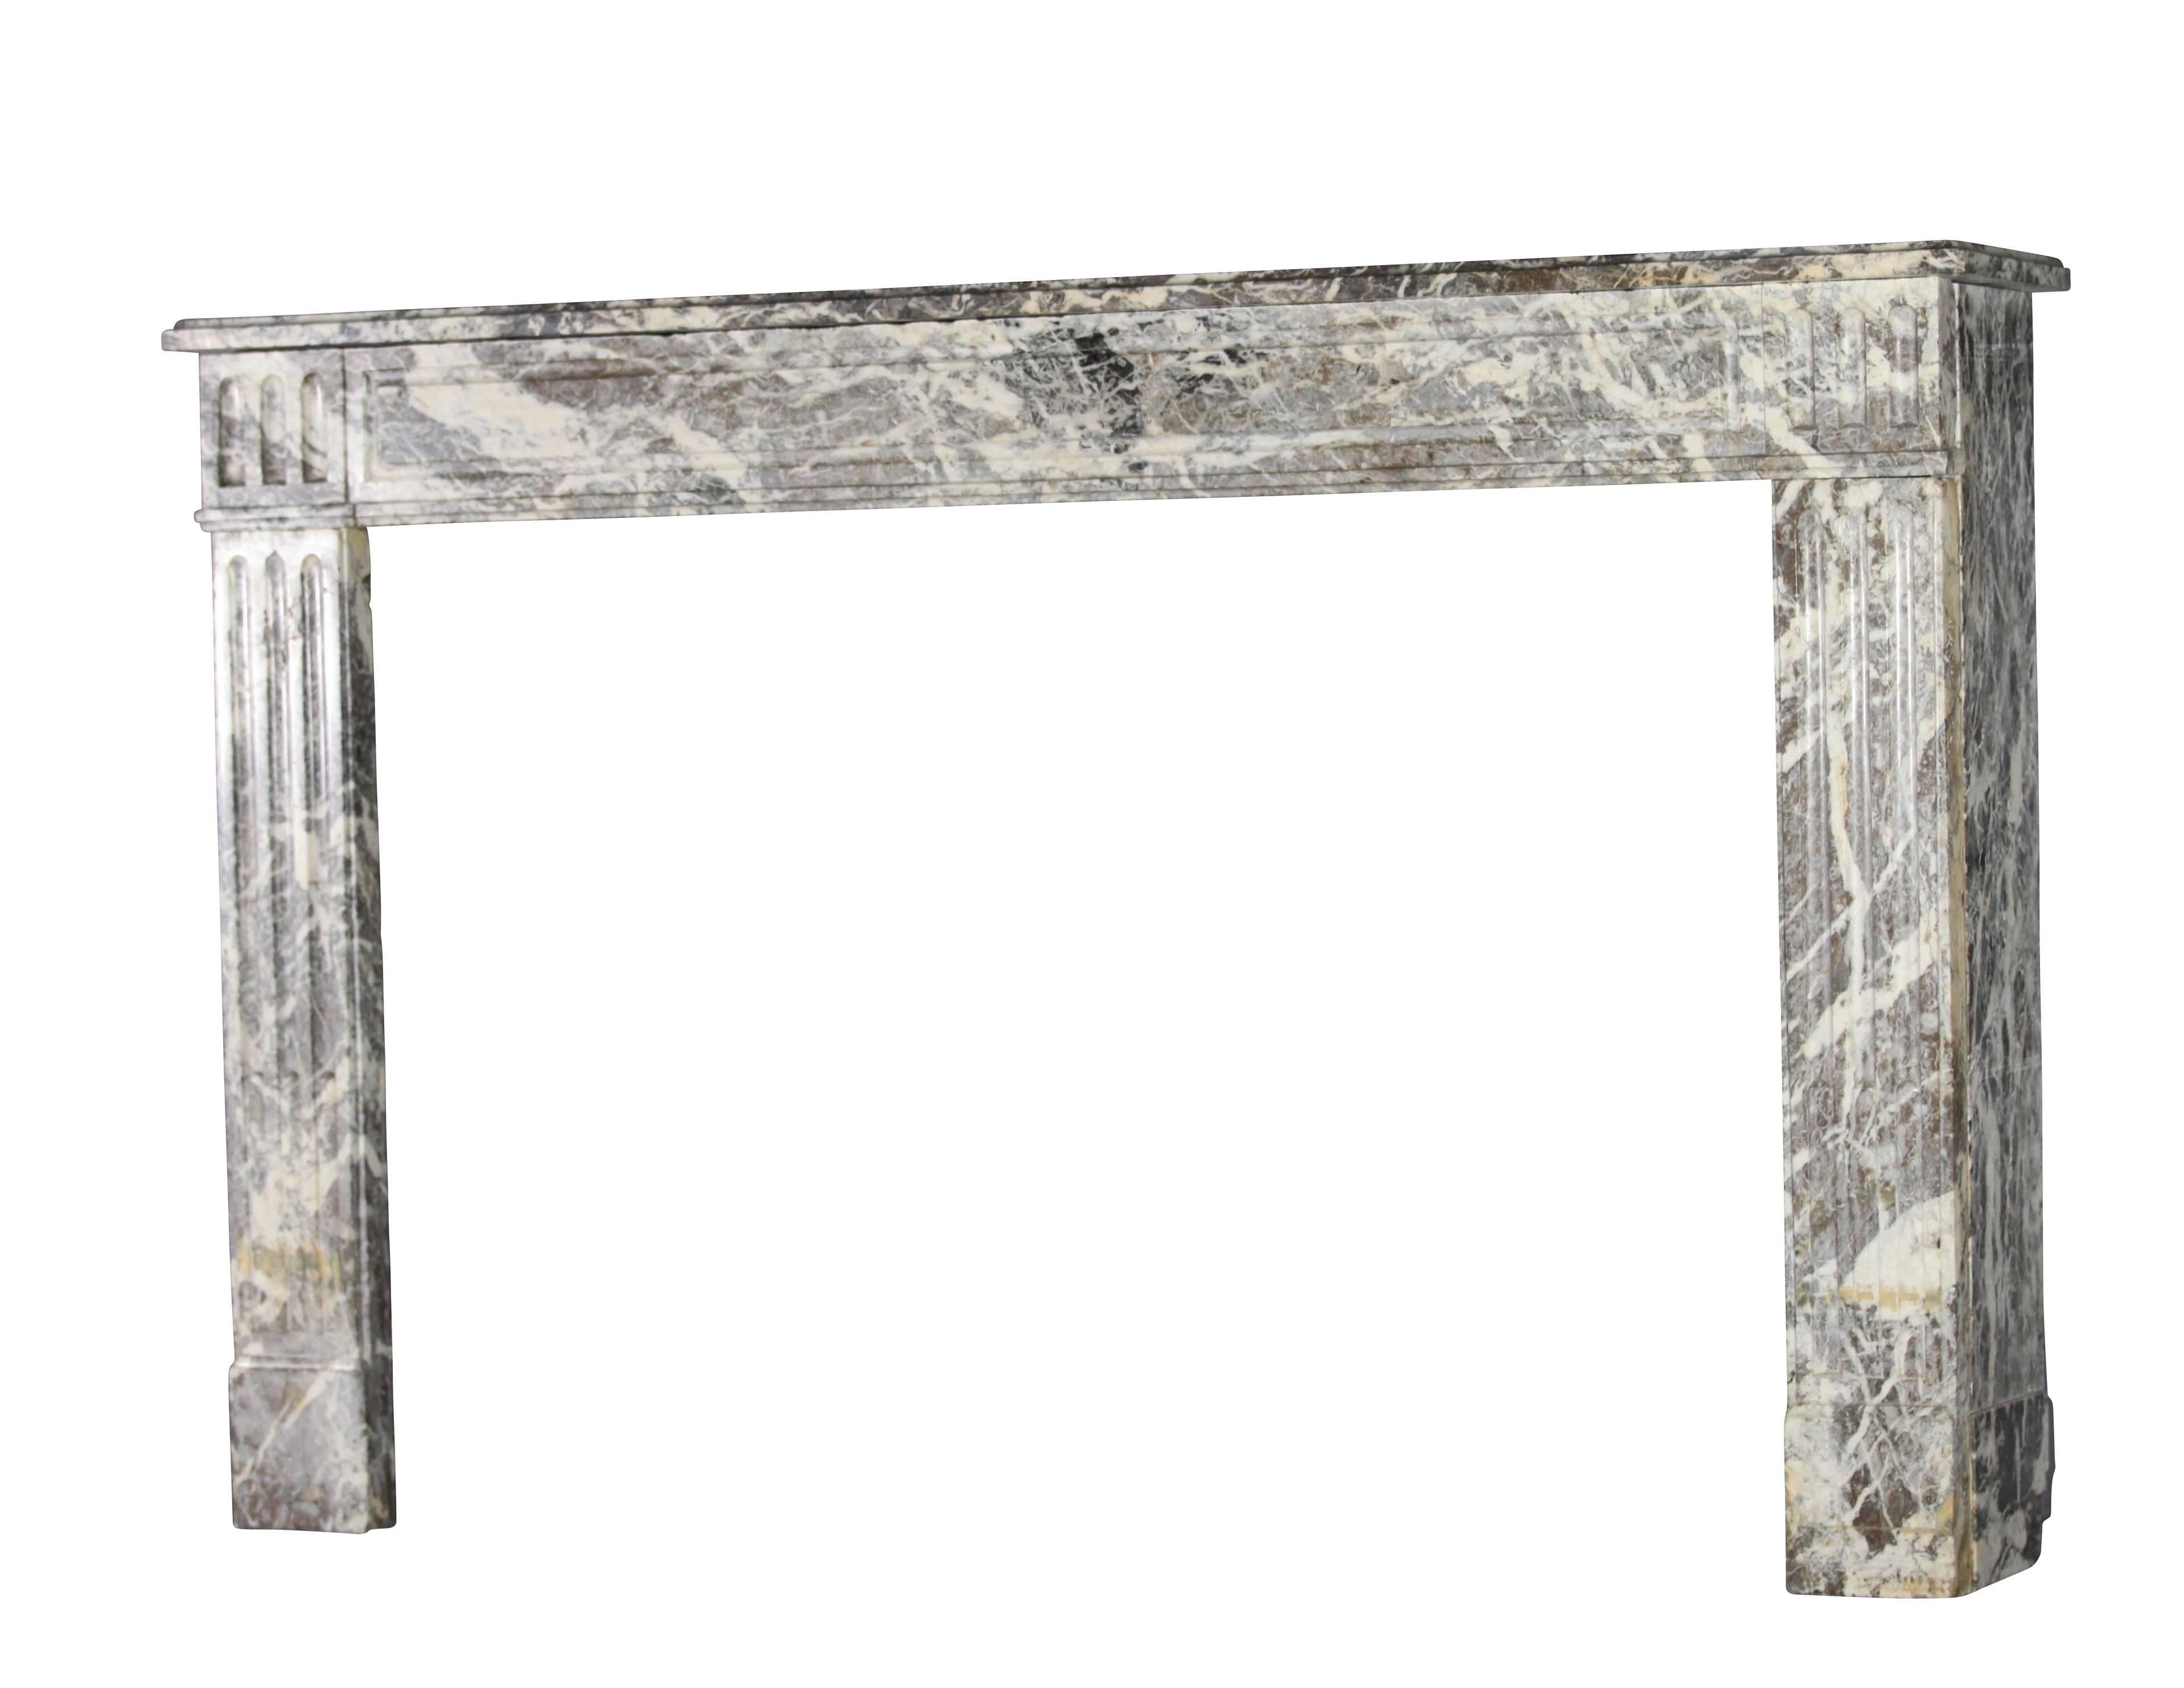 Polished 18th Century European Gris d'Ardenne Classic Marble Antique Fireplace Surround